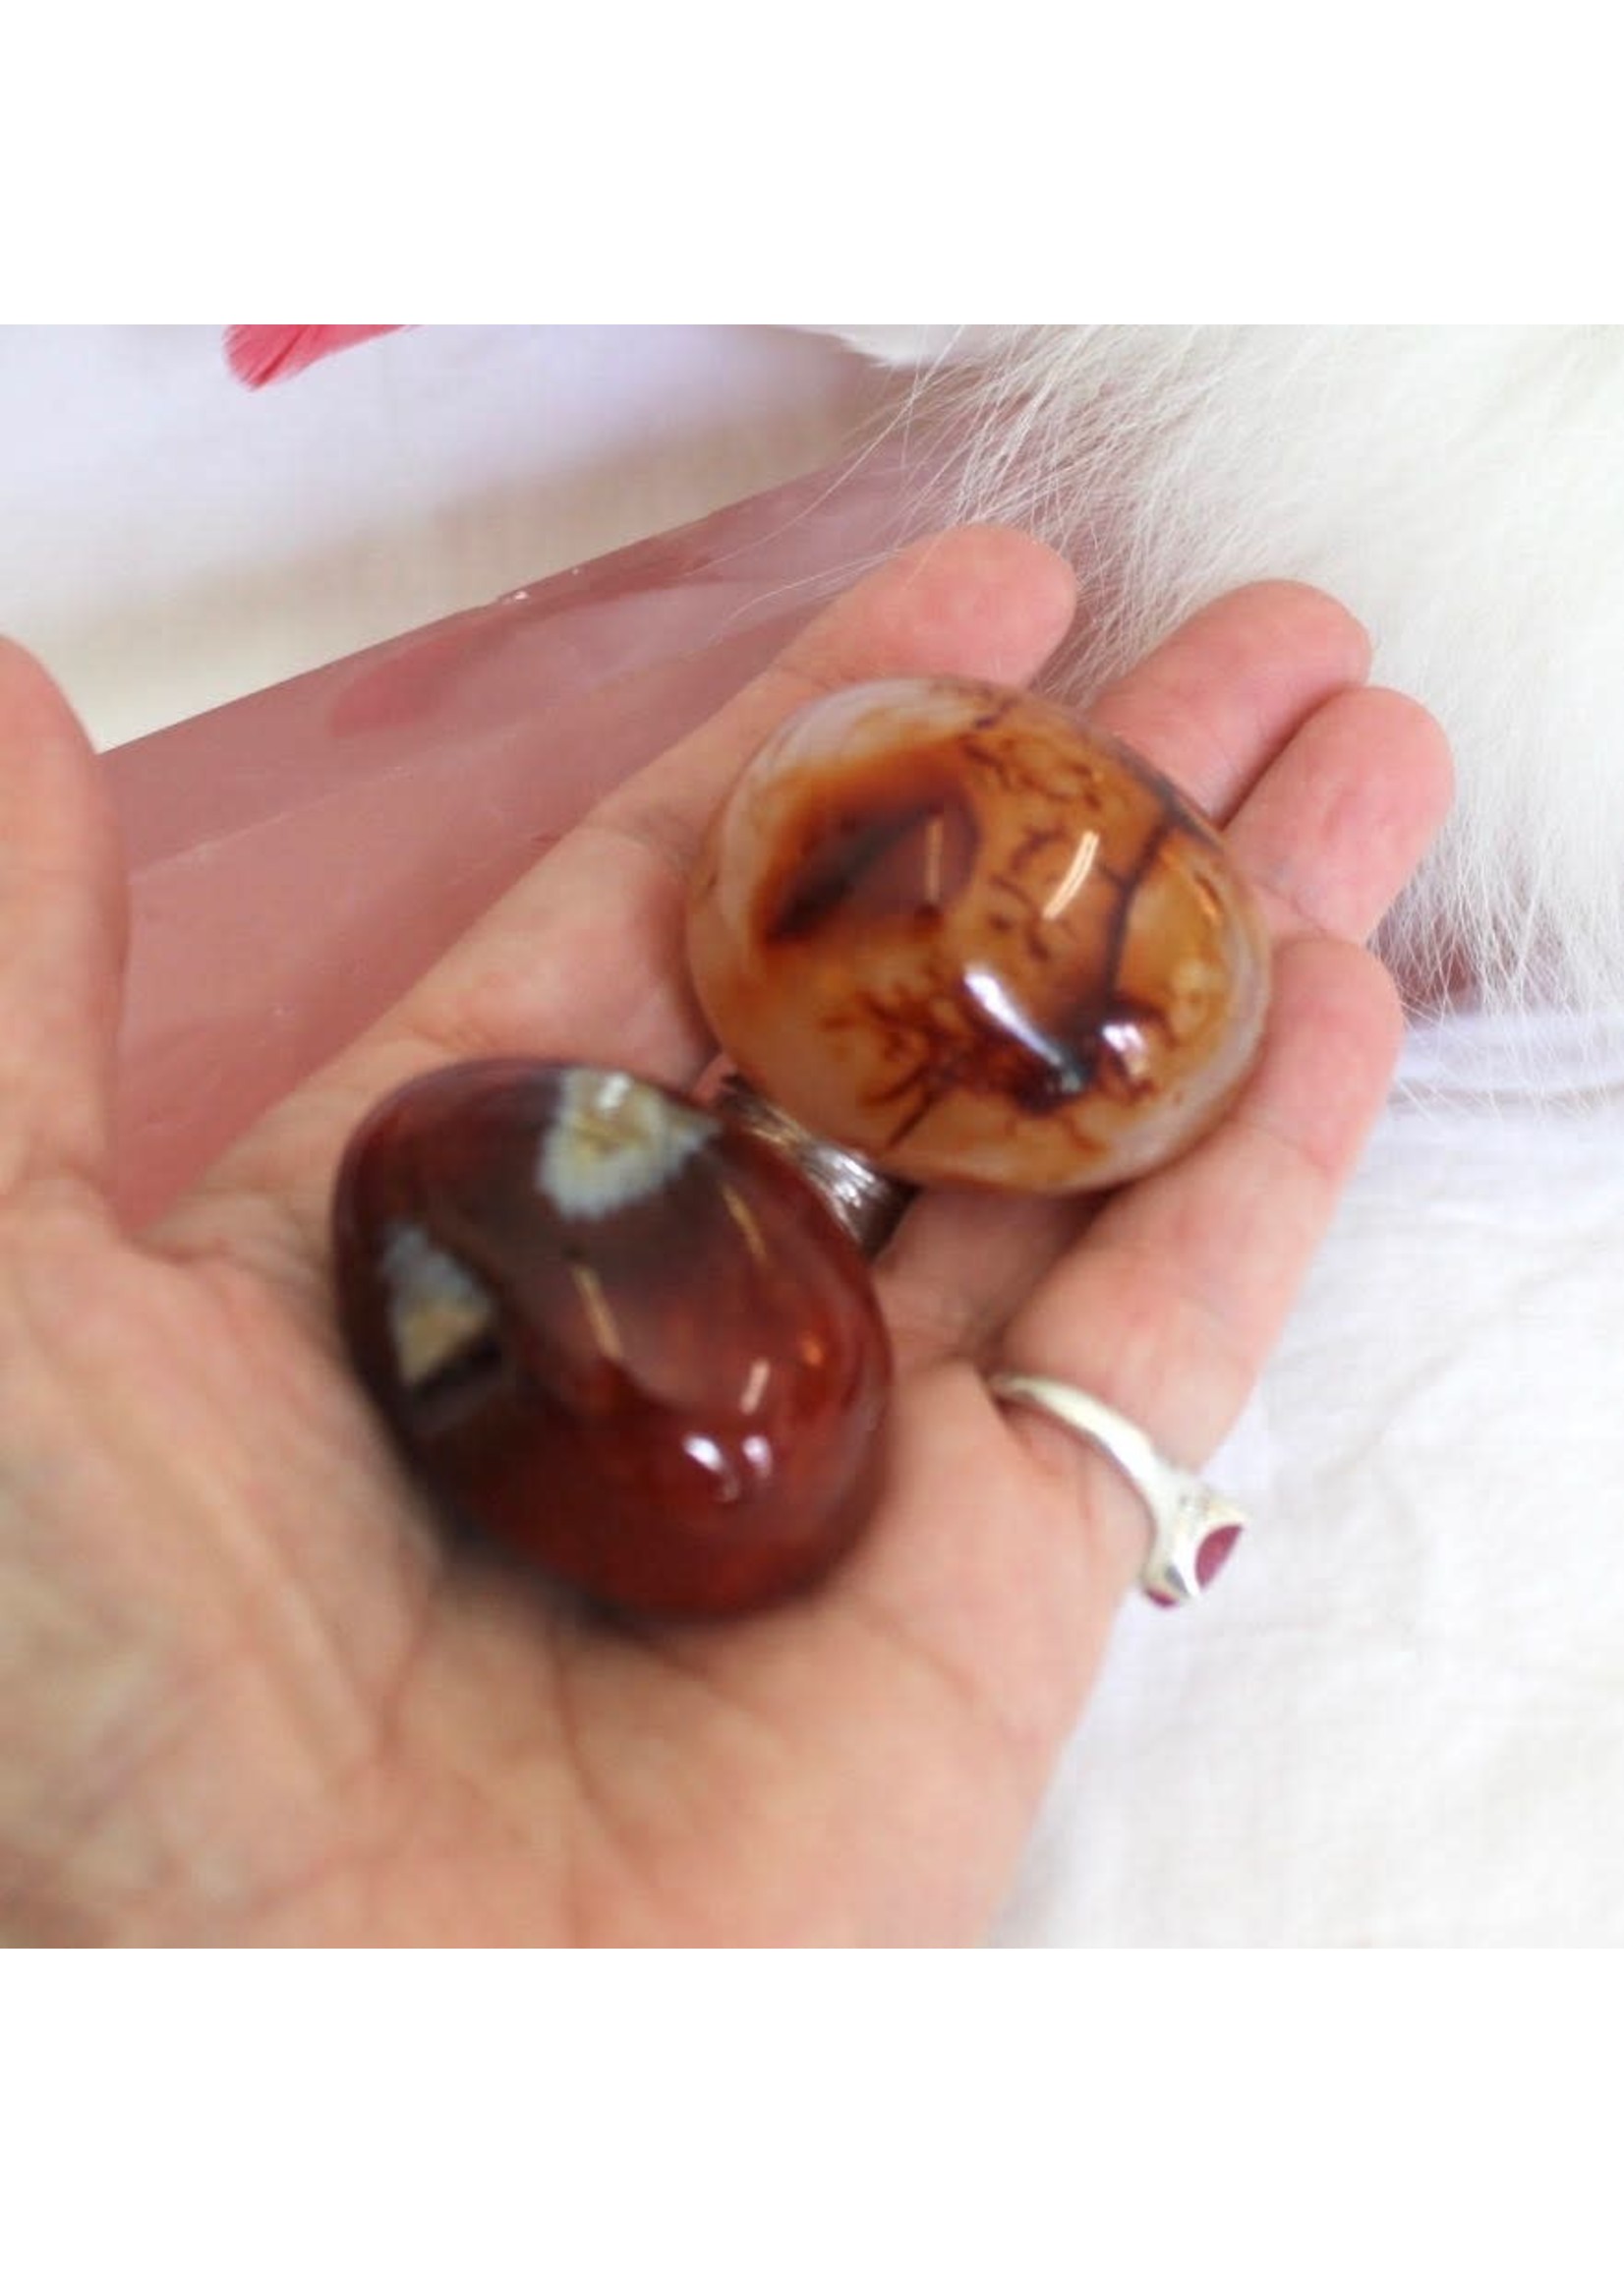 Carnelian Polished - Madagascar for creativity, courage, passion, love